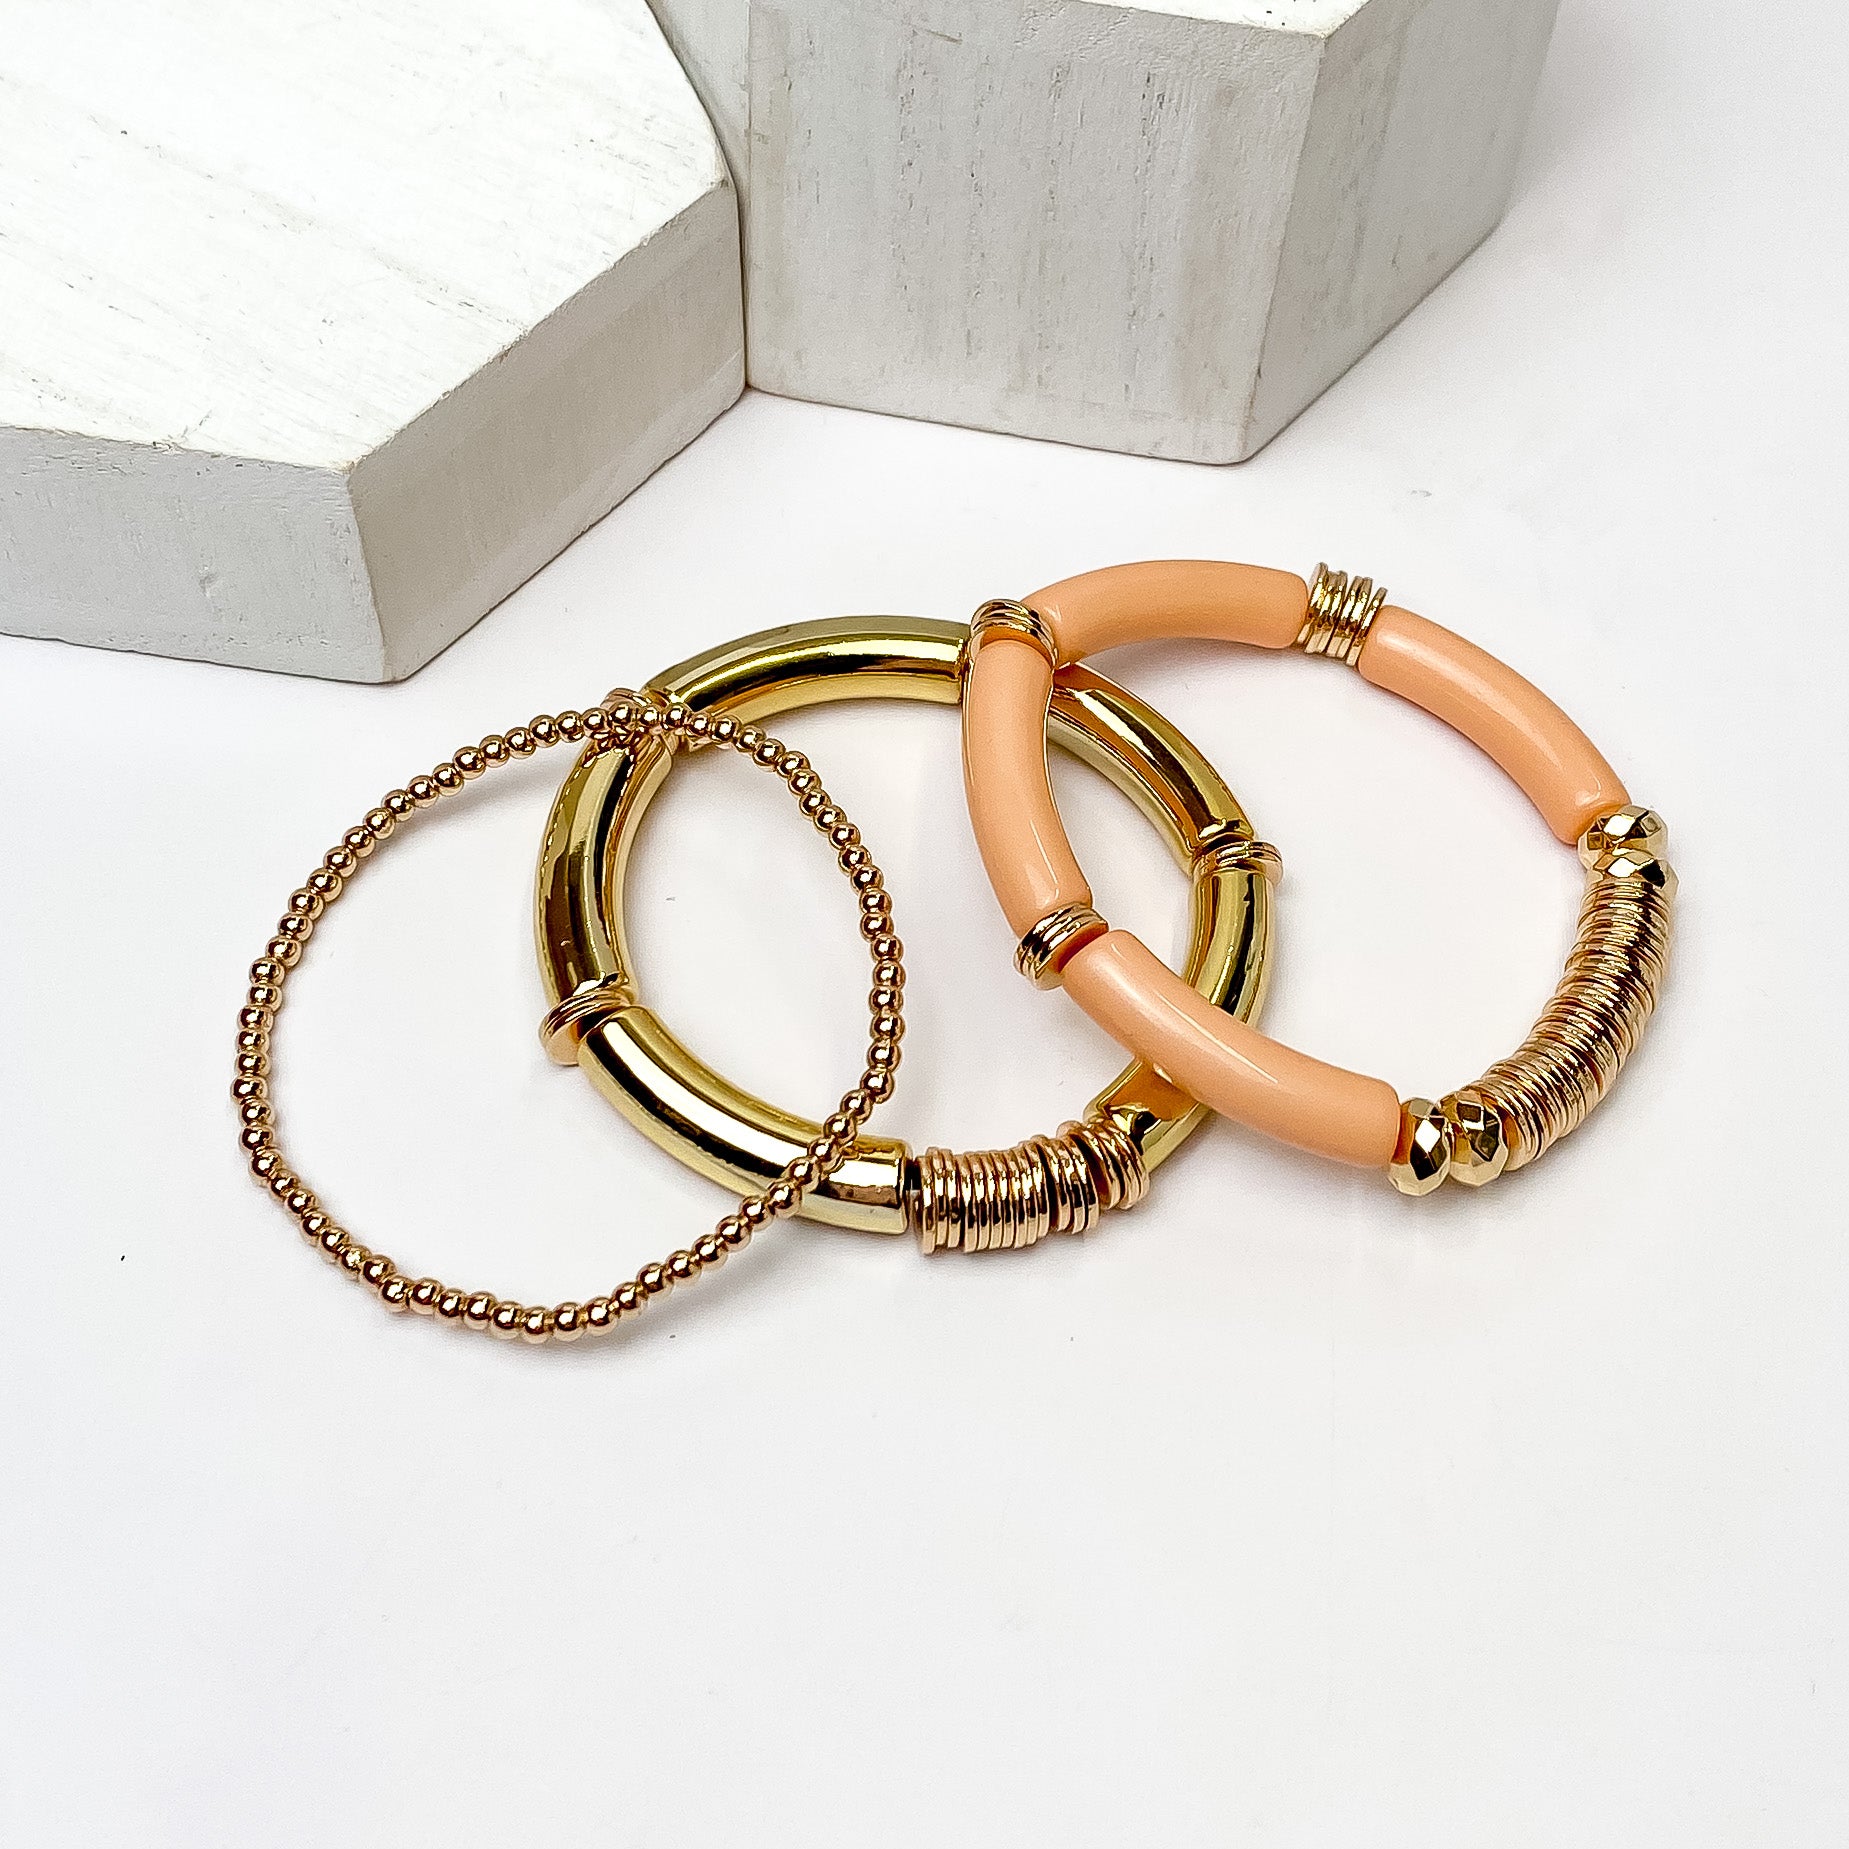 Set of Three | Bahama Nights Gold Tone Tube Bracelet Set in dusty pink. Pictured on a white background with white platforms above the bracelets.